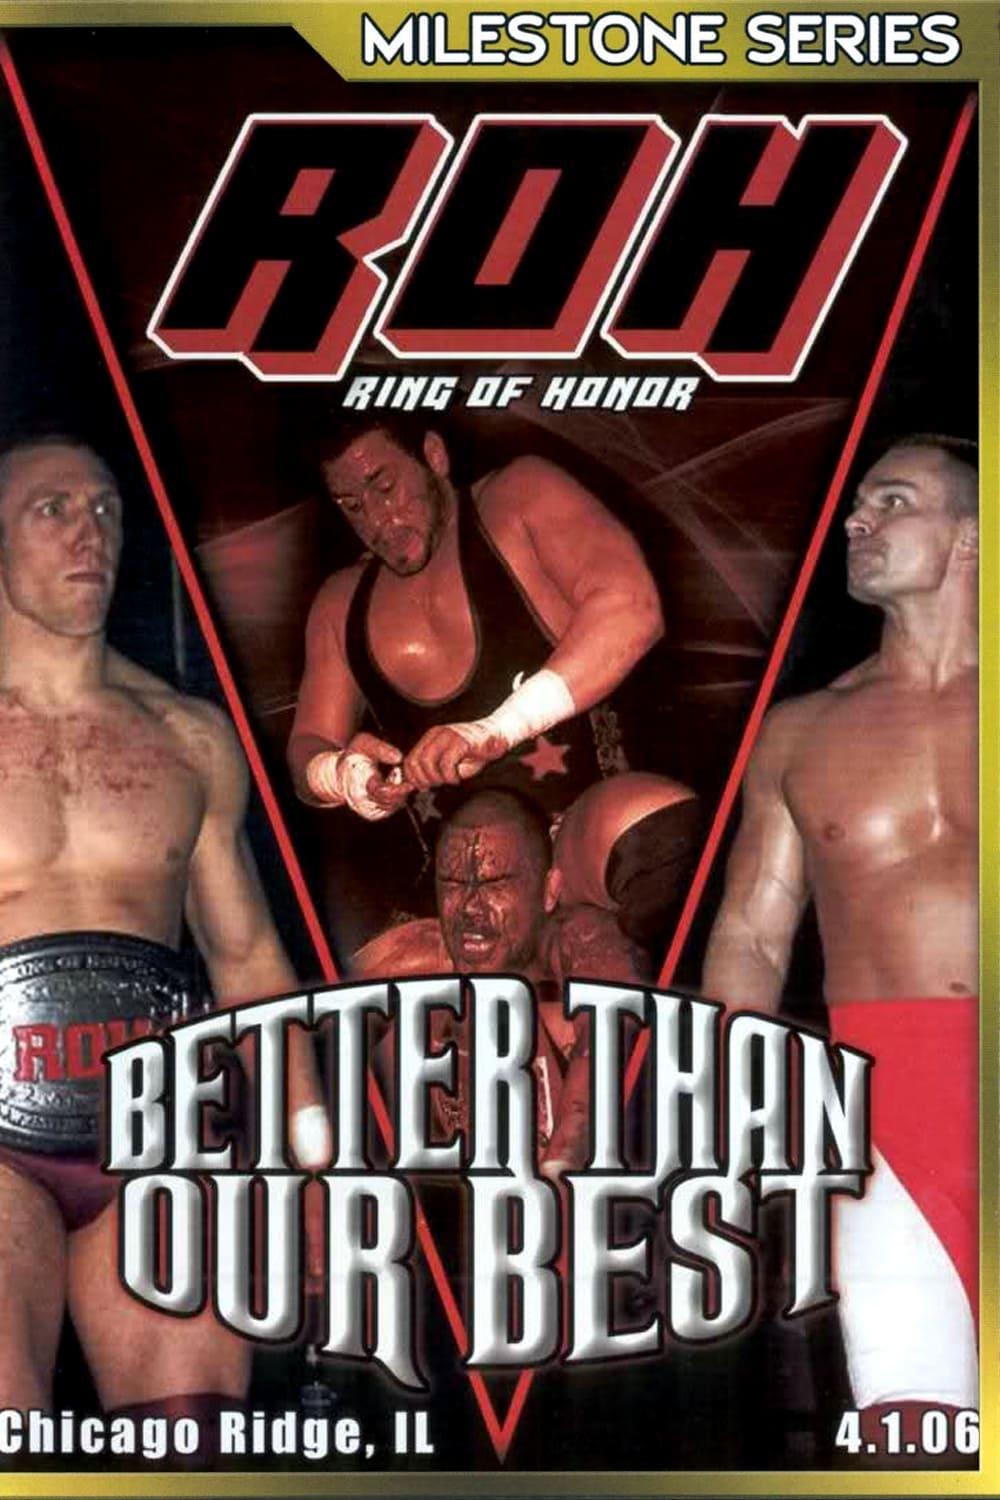 ROH: Better Than Our Best poster